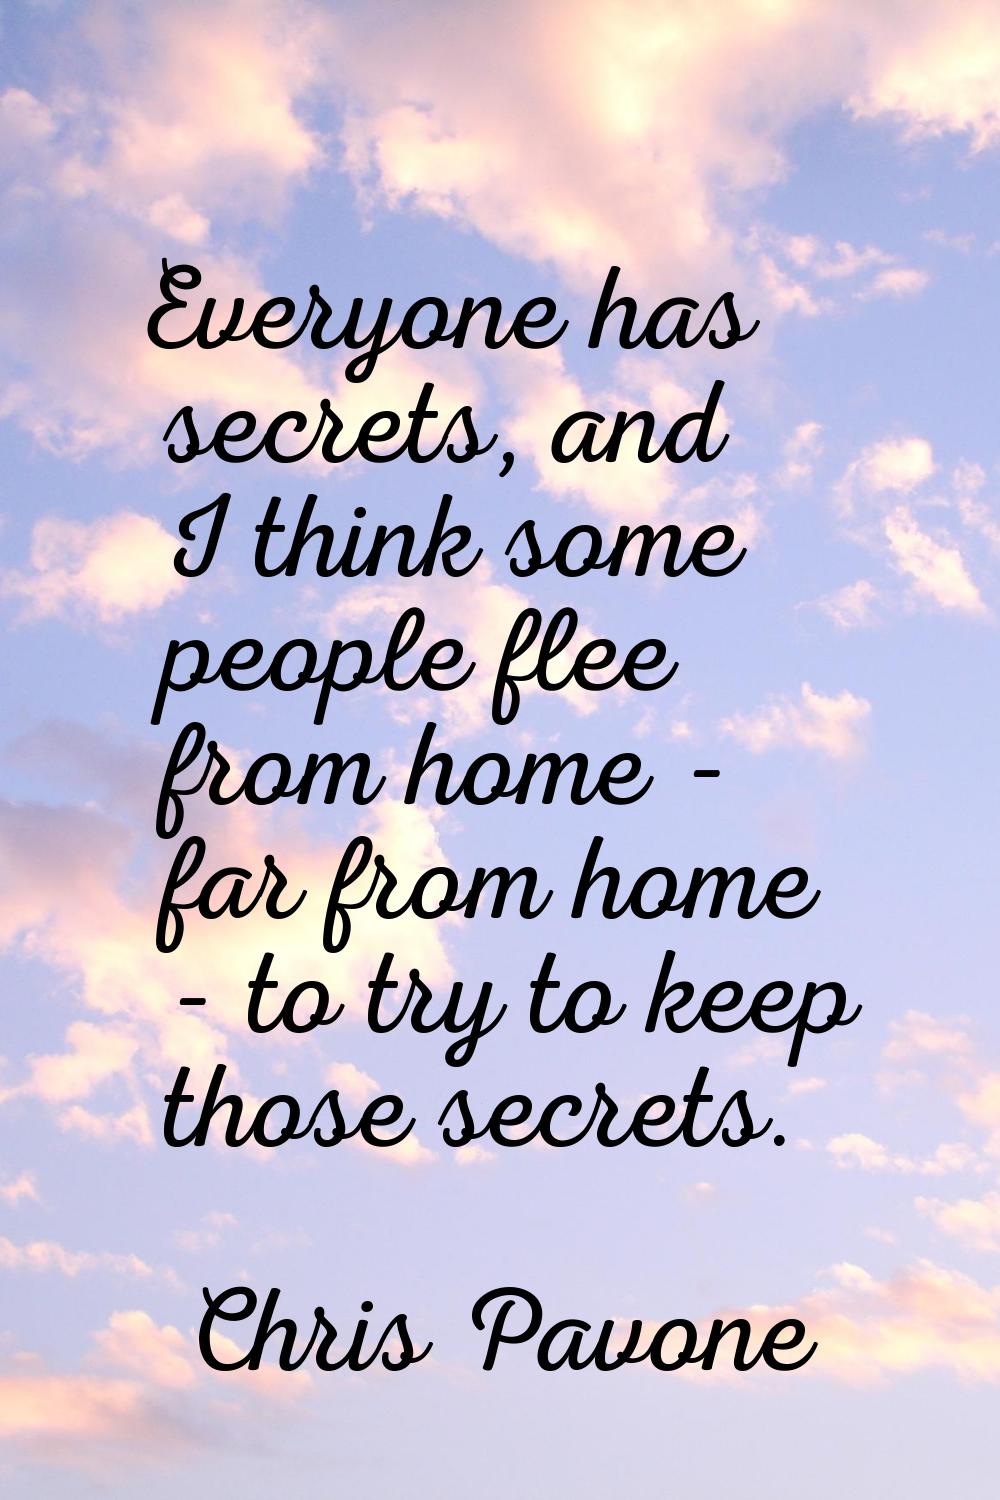 Everyone has secrets, and I think some people flee from home - far from home - to try to keep those